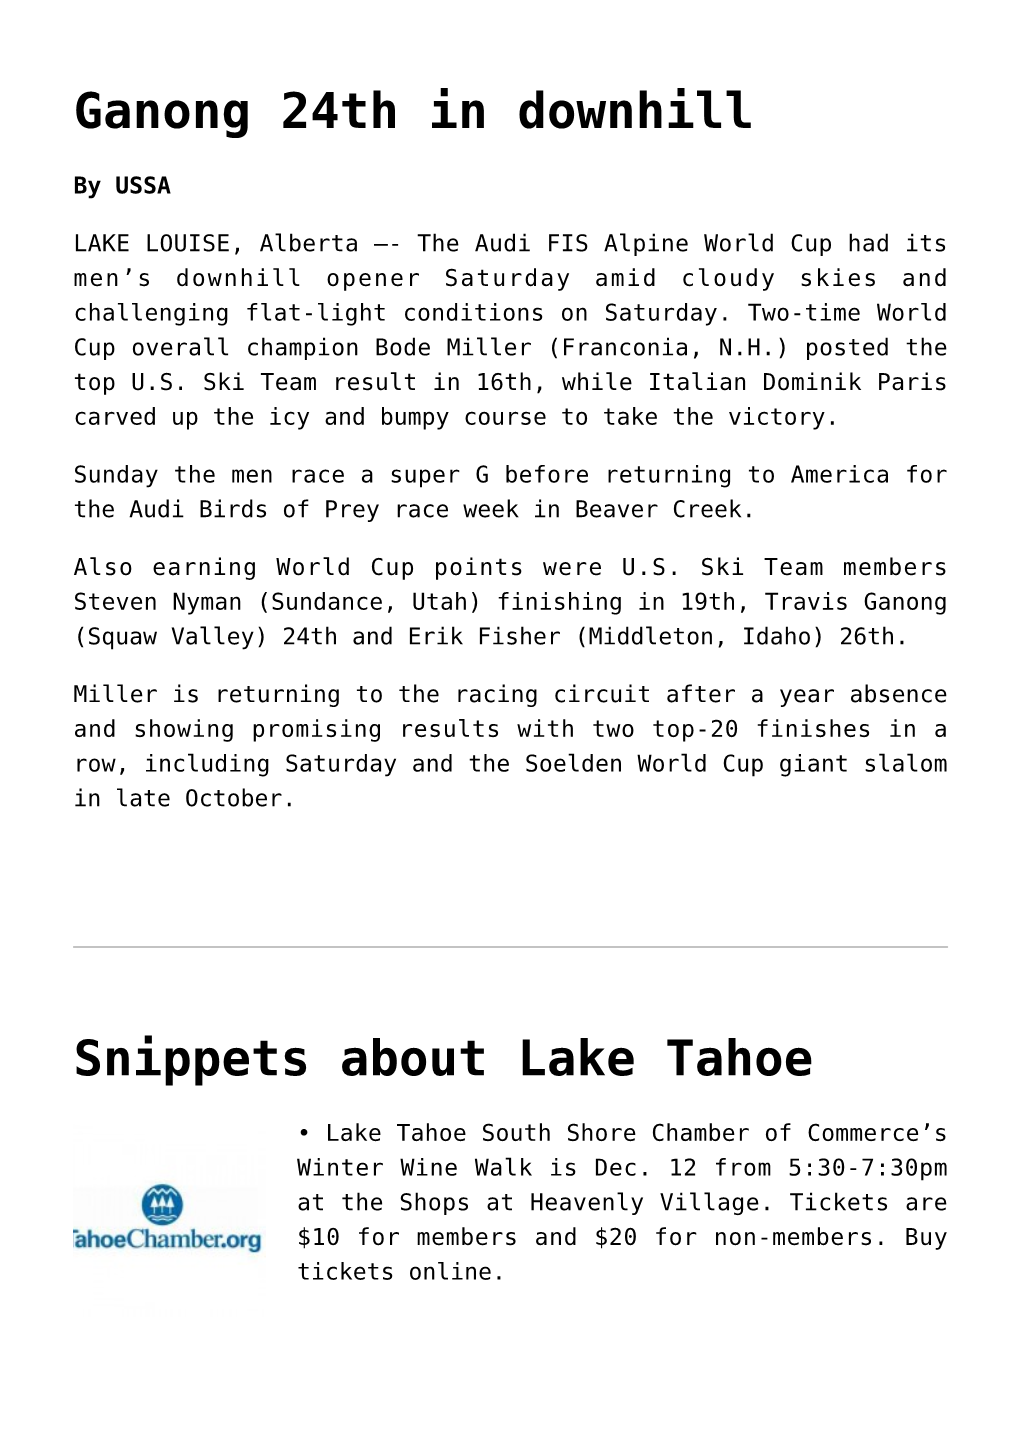 Ganong 24Th in Downhill,Snippets About Lake